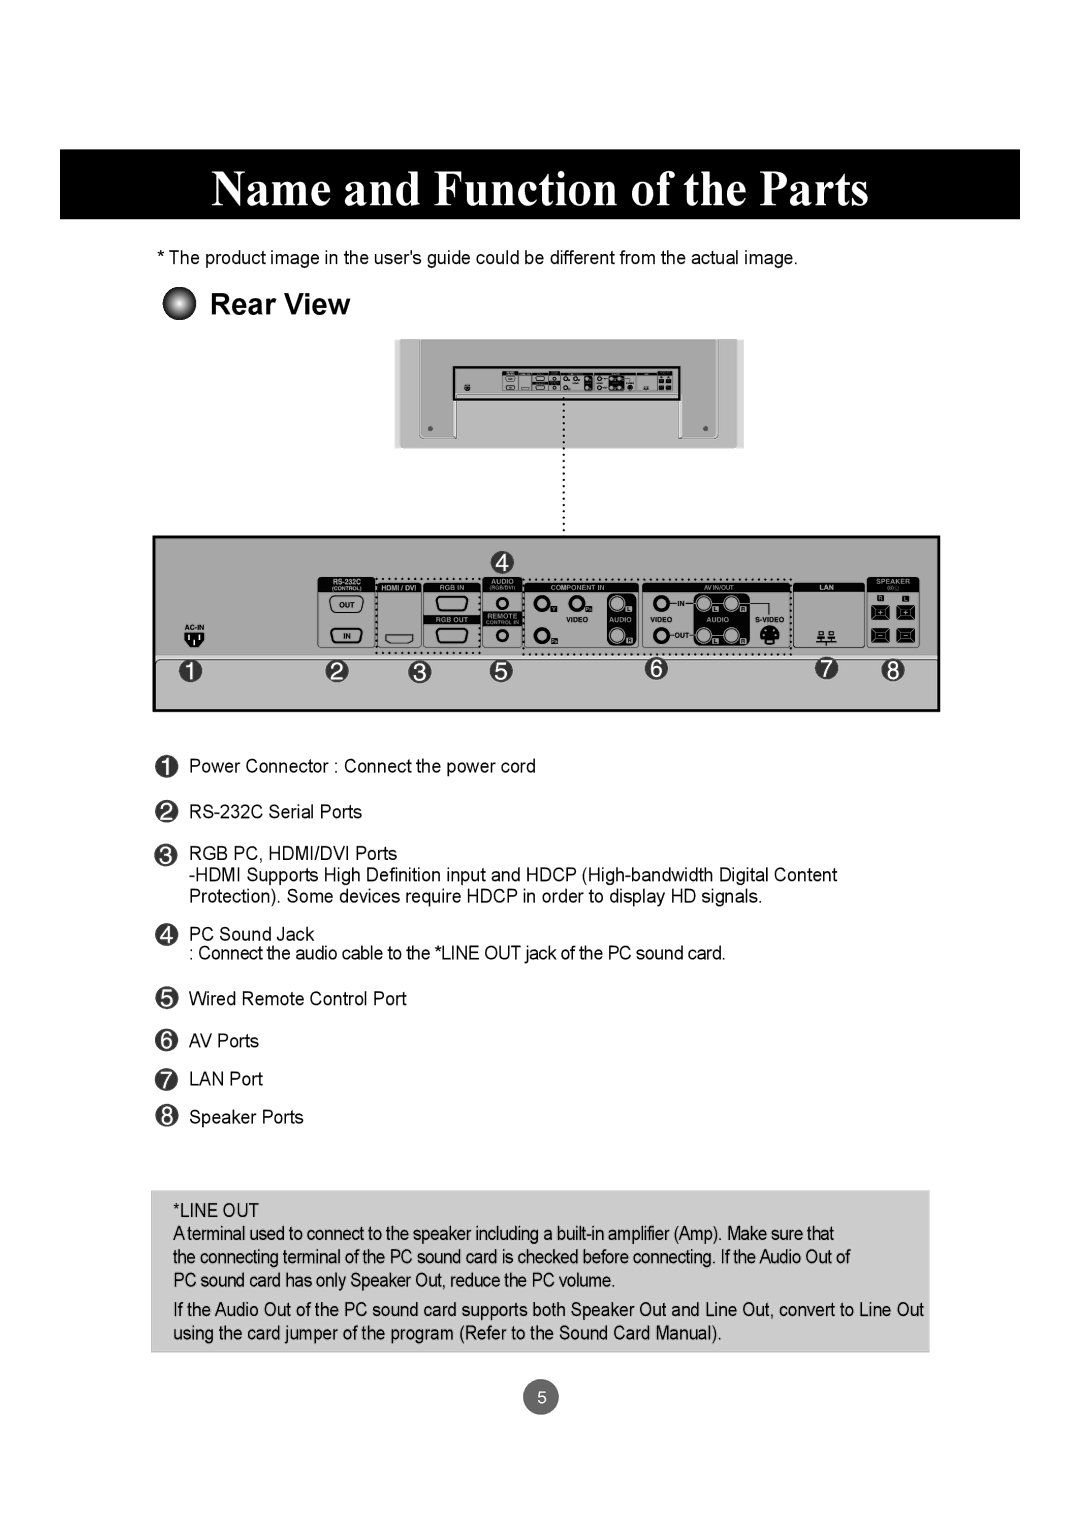 LG Electronics M6503C manual Name and Function of the Parts, Rear View 